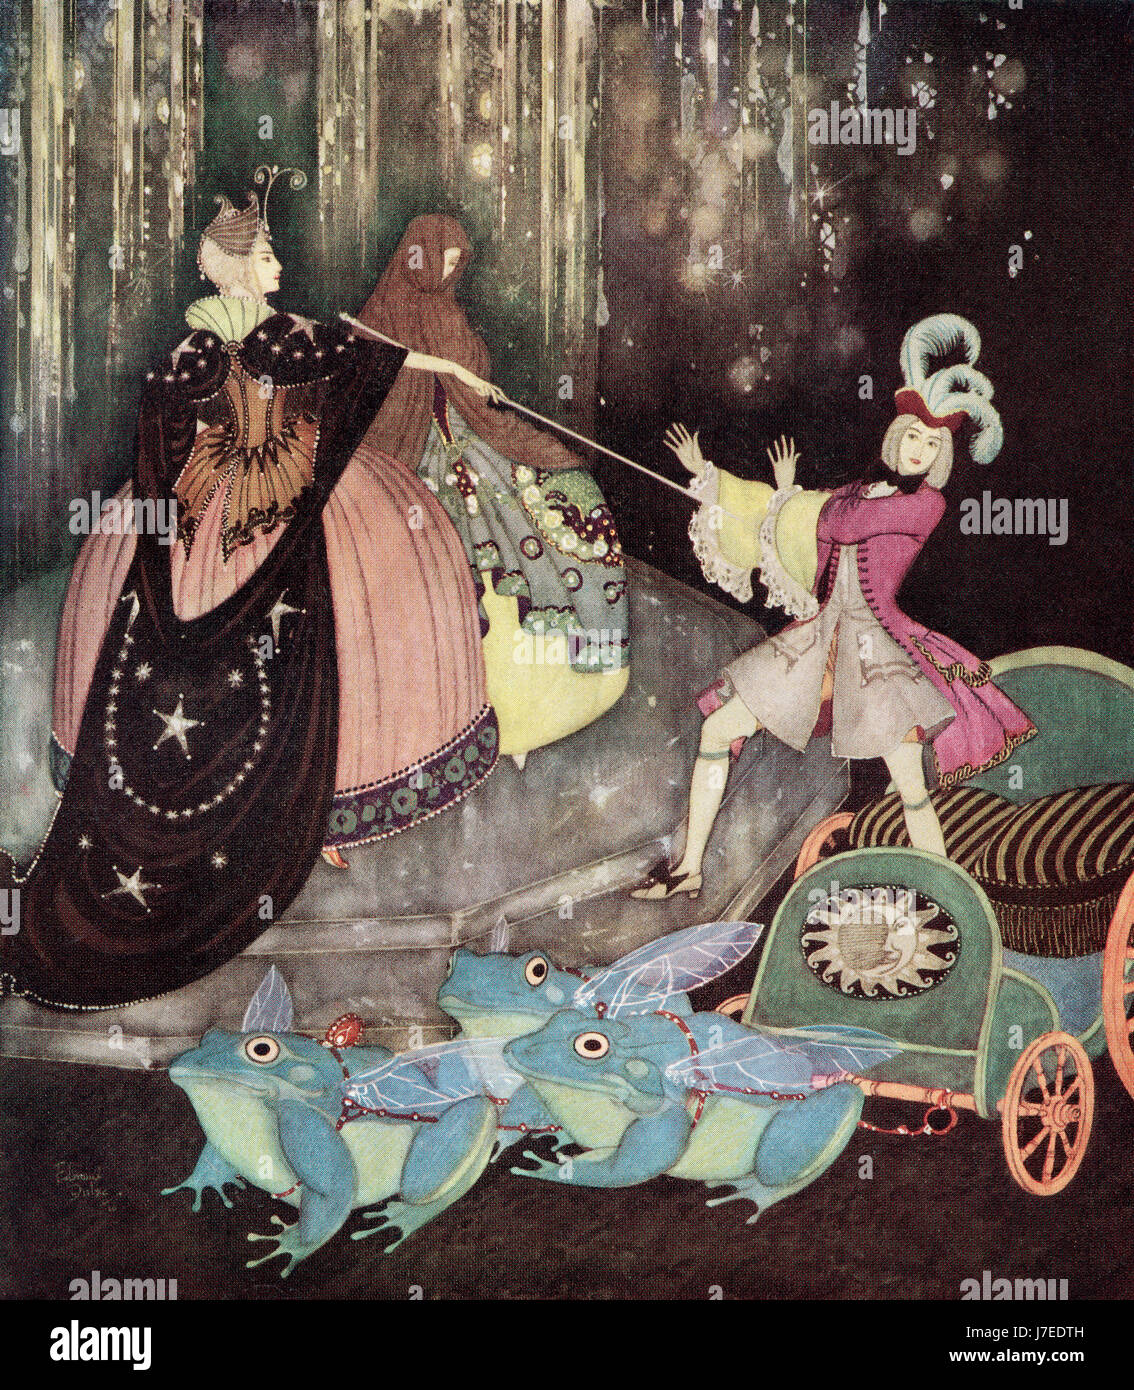 ' The Prince took a carriage drawn by three great frogs with great big wings. Truitonne came out mysteriously by a little door'.   Illustration from the French fairytale The Blue Bird.  From Edmund Dulac's Fairy-Book: Fairy Tales of the Allied Nations, published 1916. Stock Photo